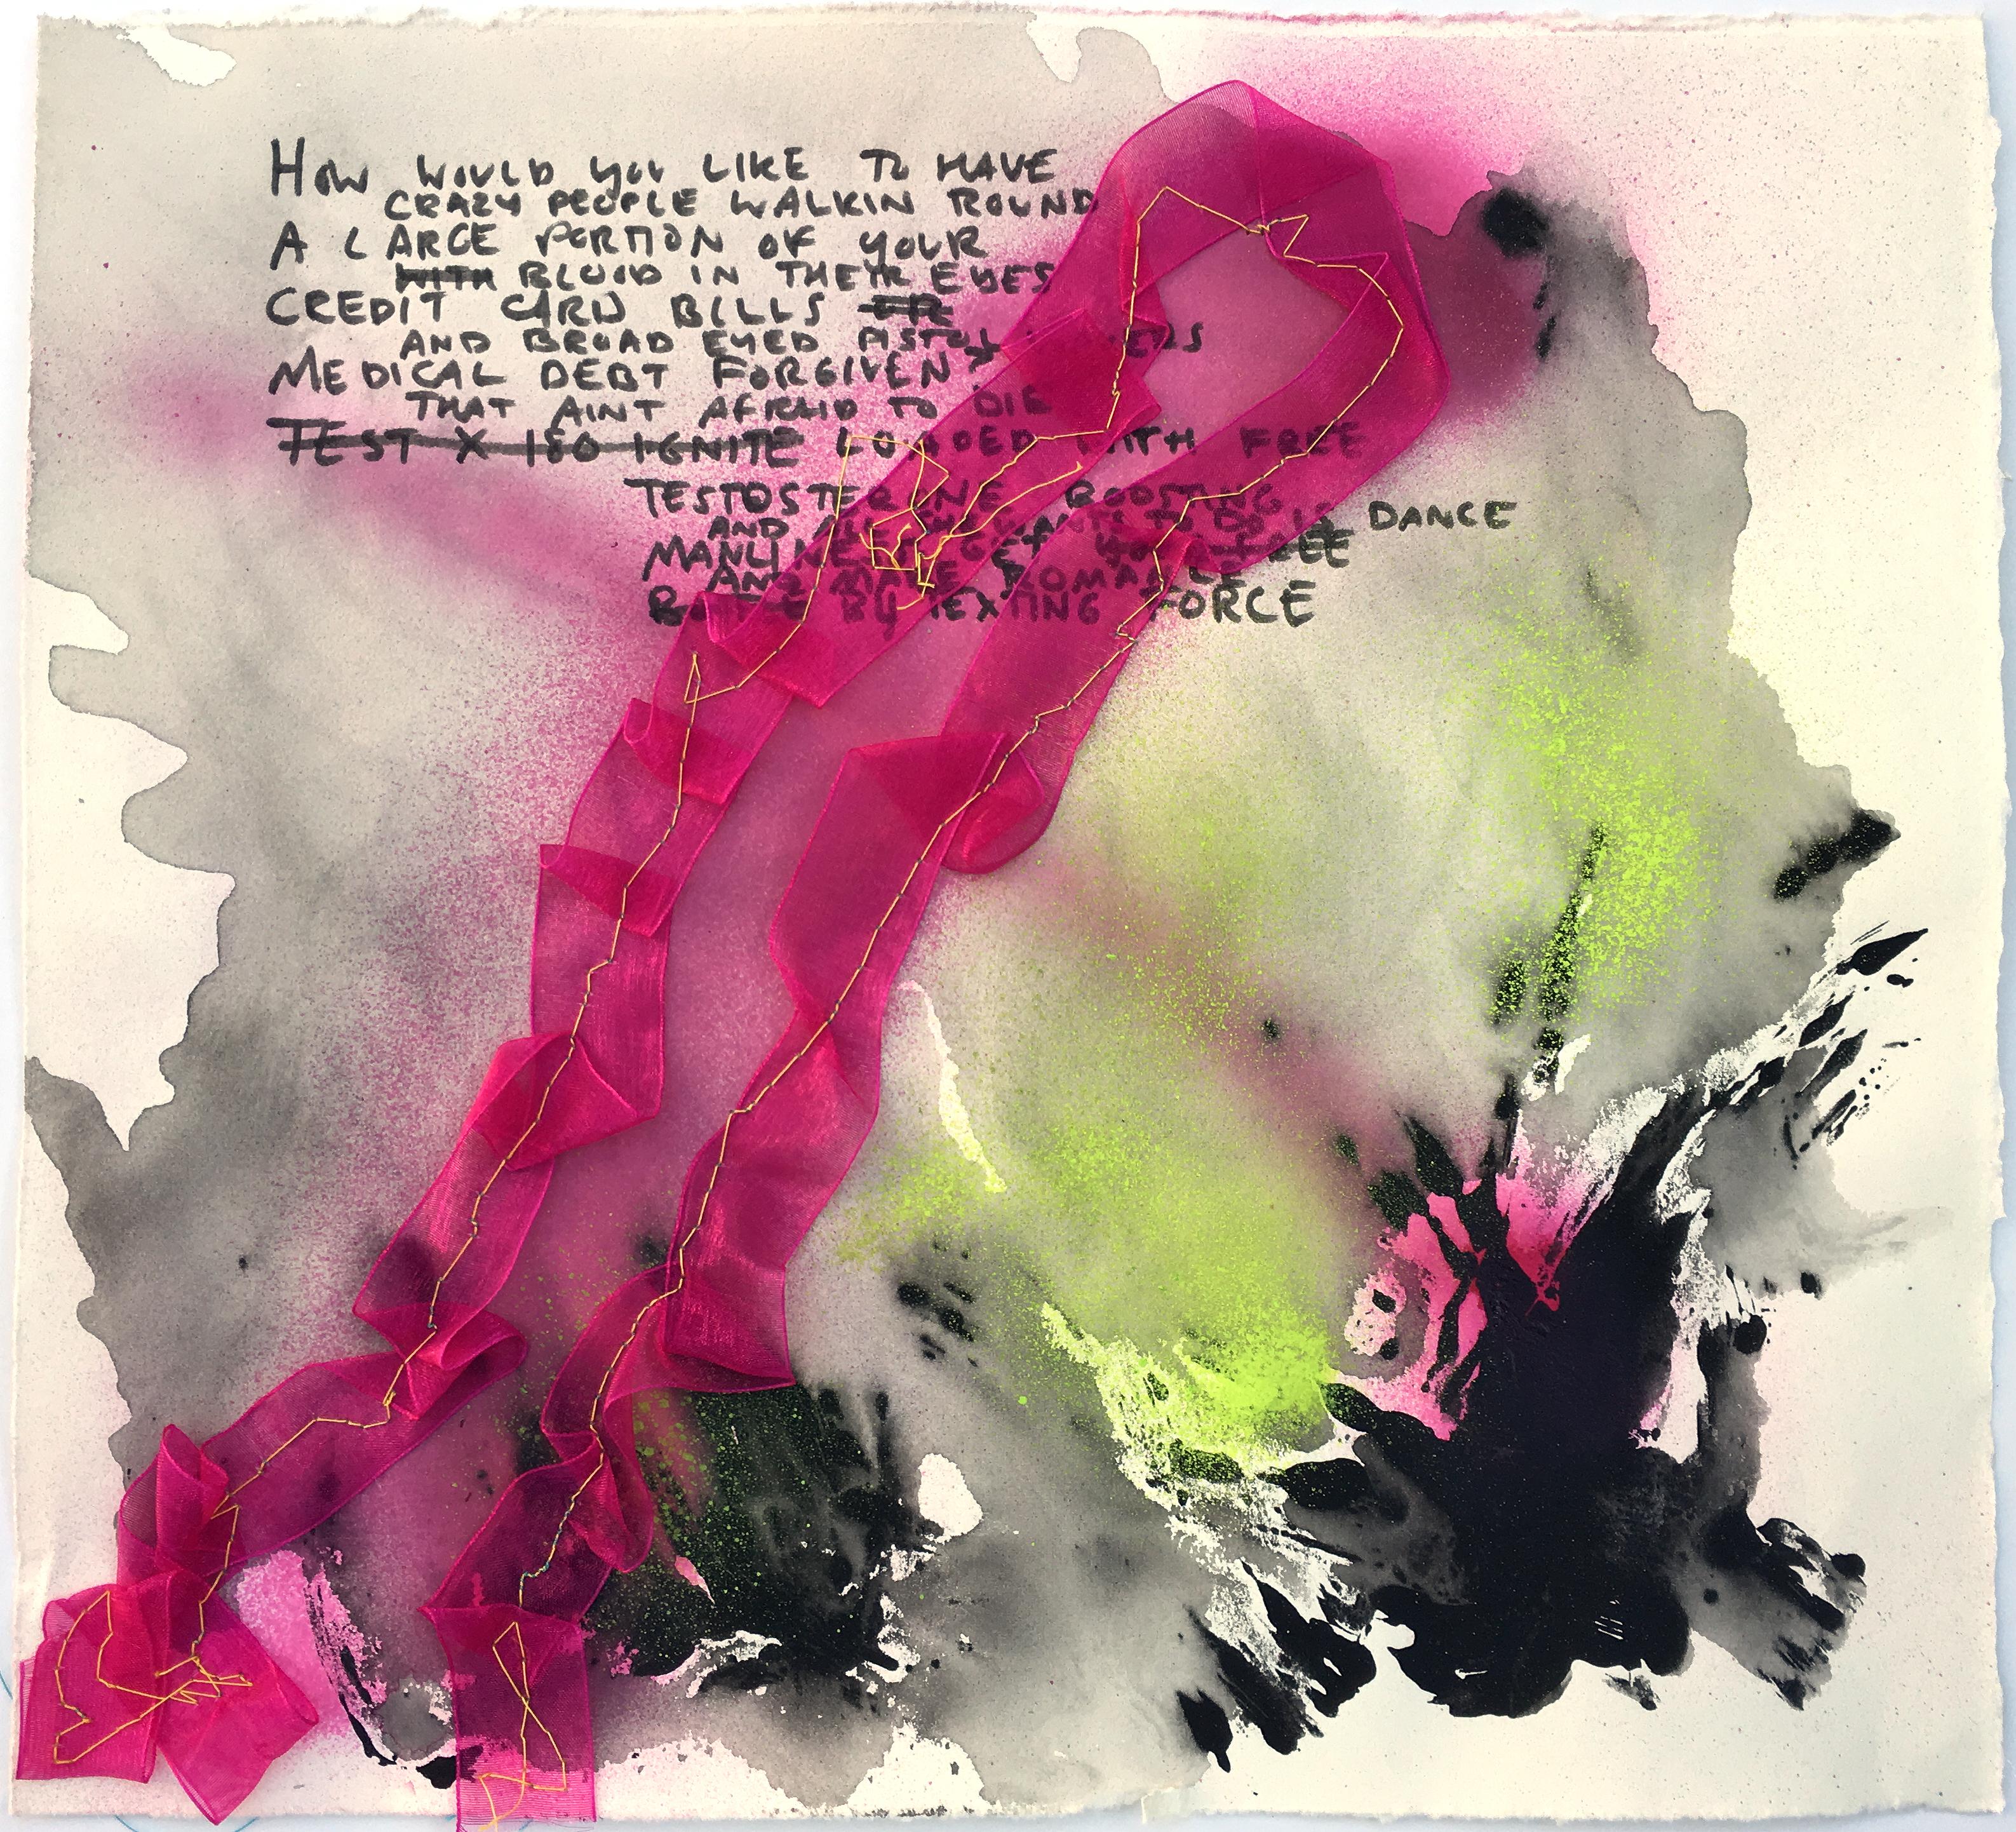 Vivian Liddell Abstract Drawing - How Would You Like To Have- Mixed Media Text Based Abstract Work on Paper